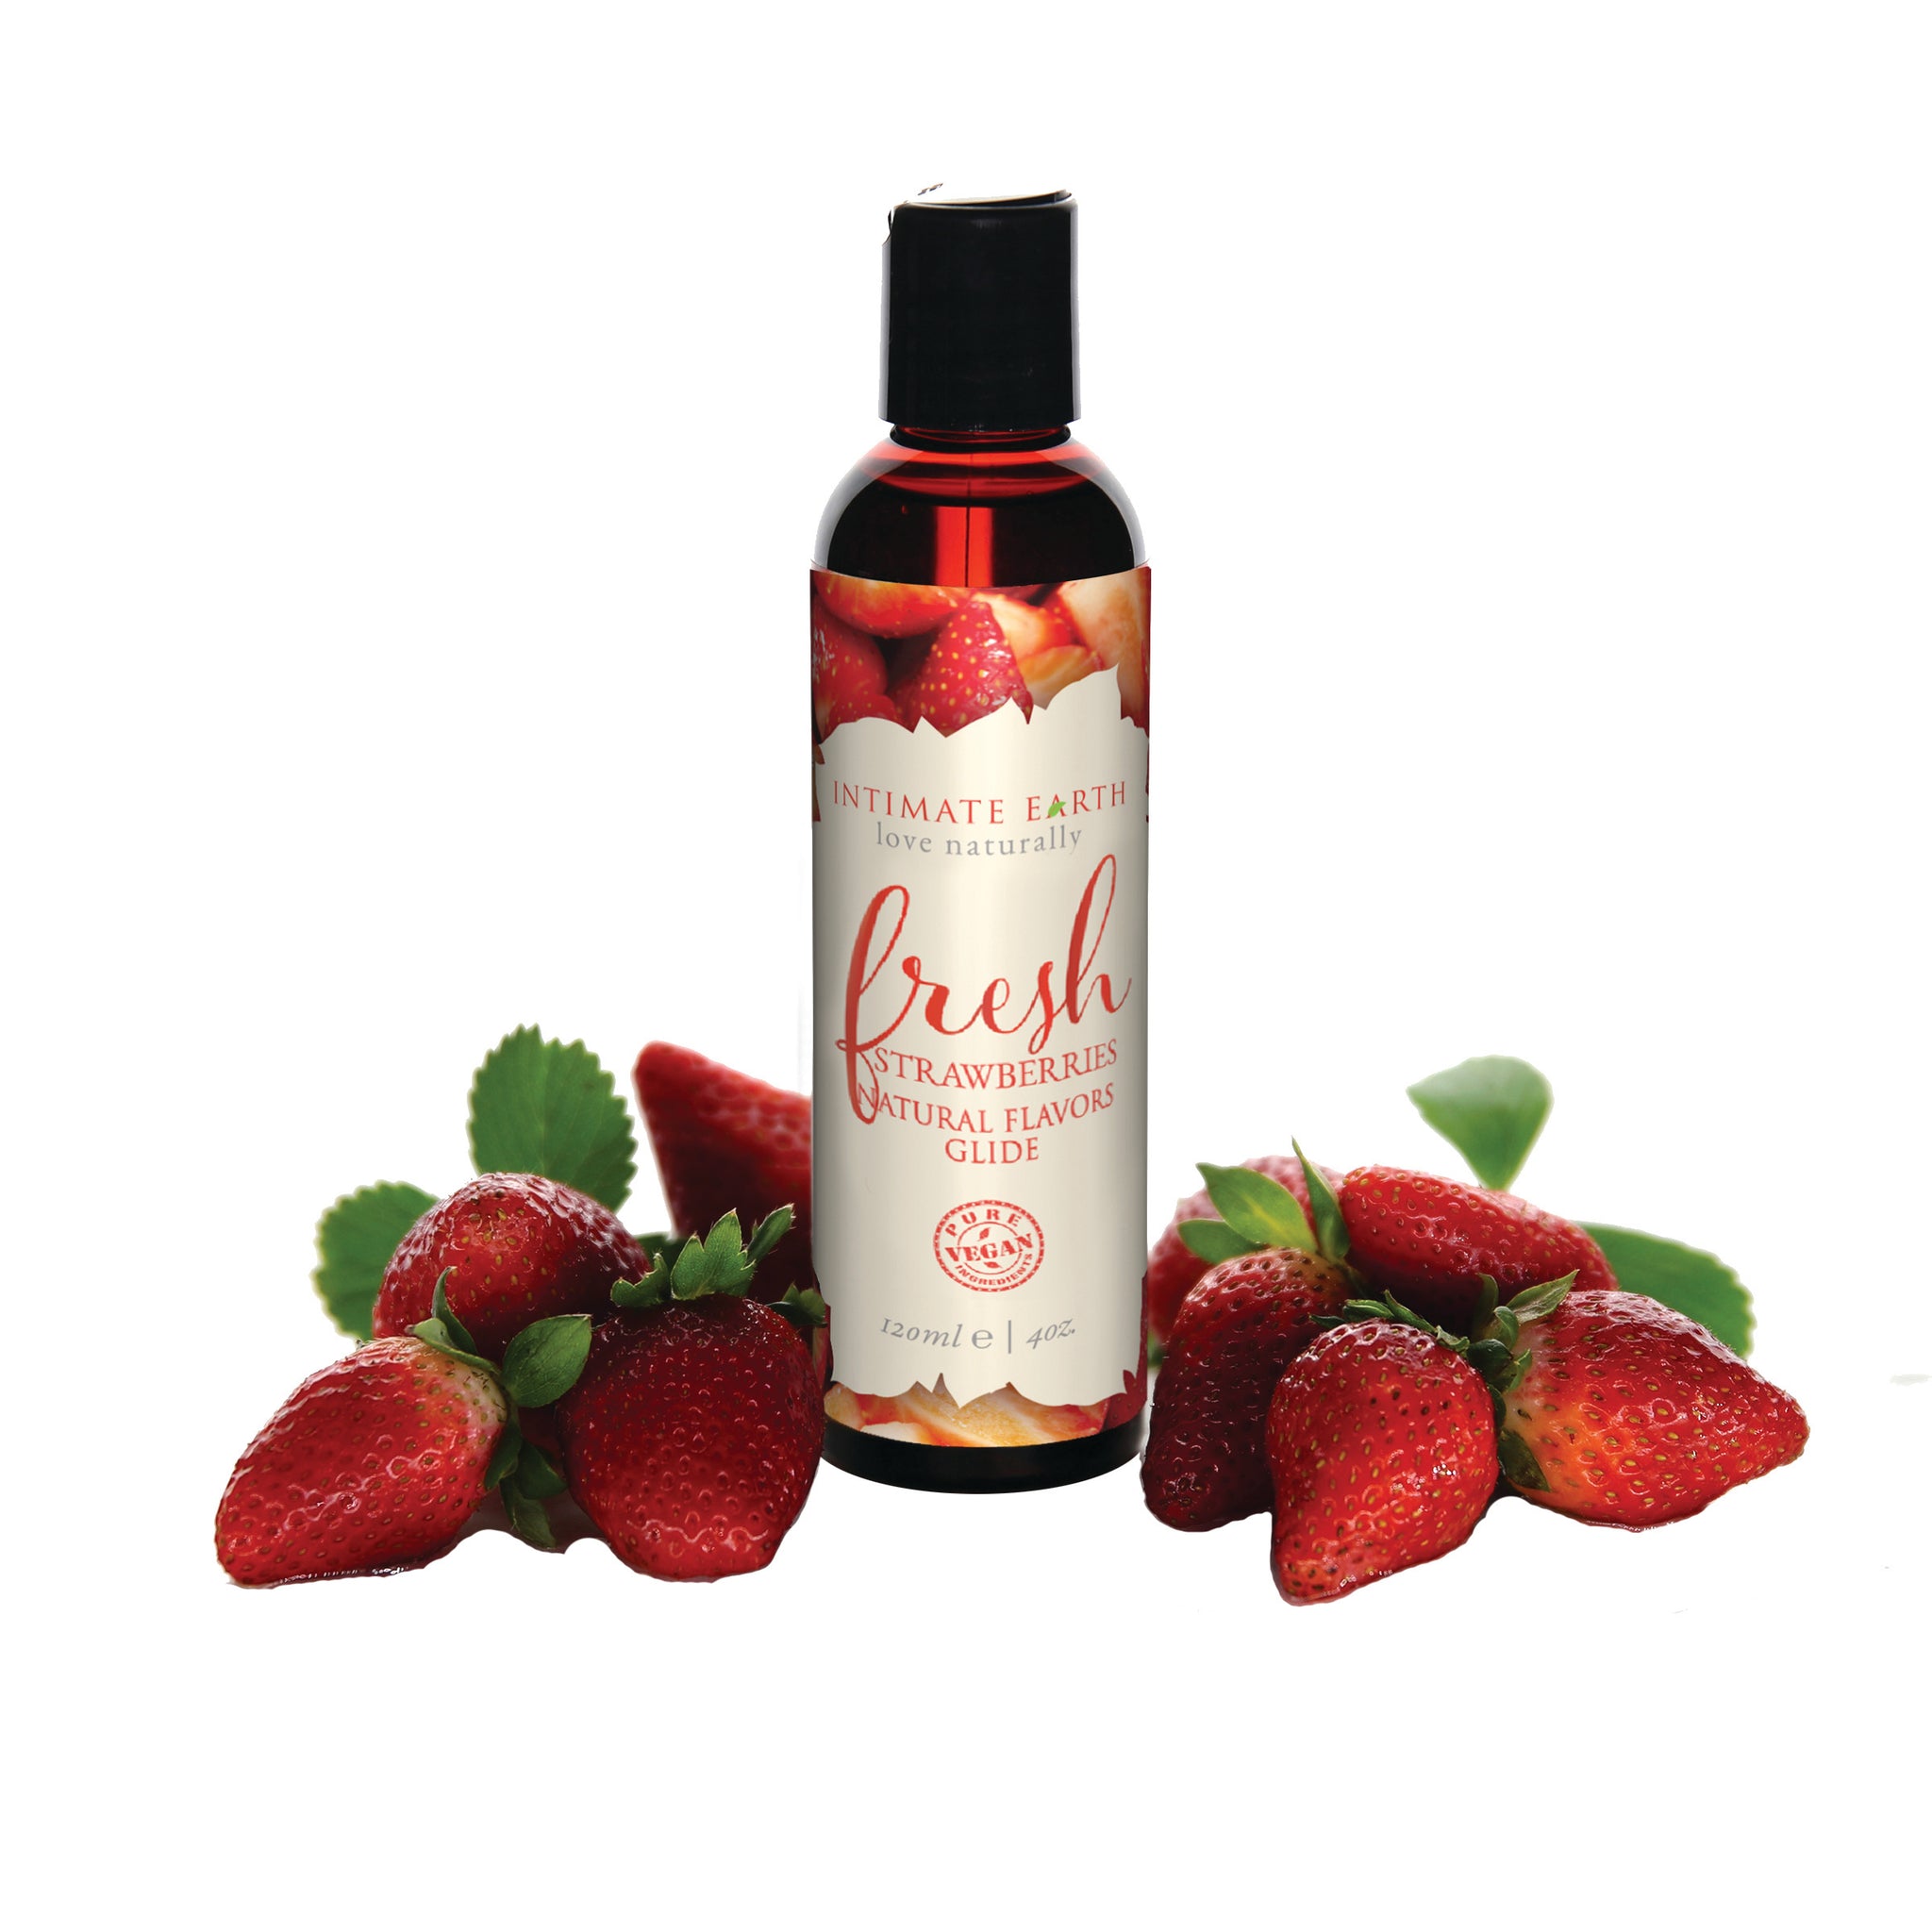 Delicate and lightly scented of fresh strawberries.   If you don’t have a sweet tooth, instead preferring a delicate fruit flavor over a dessert, we highly suggest spoiling yourself and trying the seductive flavors offered by the Wild Strawberries version. Made with Organic Stevia   Ingredients Plant Derived Glycerin, Propylene Glycol, Flavor, Purified Water (Aqua), *Aloe Barbadensis Leaf Extract, *Cymbopogon Schoenanthus Extract, *Lycium Barbarum (Goji) Fruit Extract, *Stevia Rebaudiana Leaf Extract